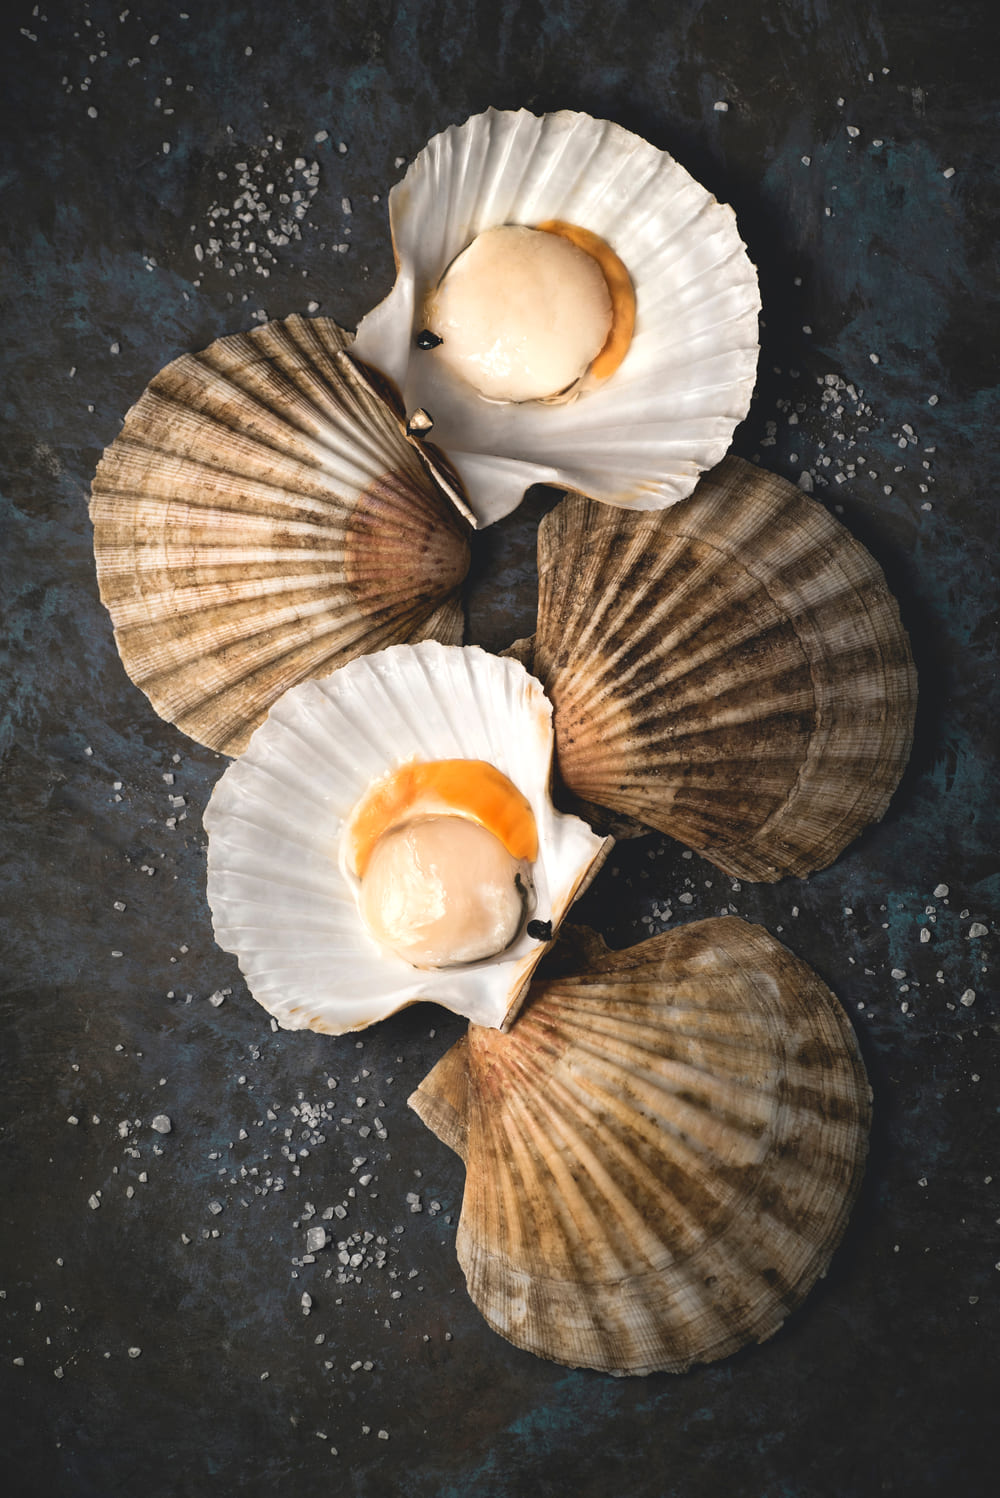 Coquilles St Jacques